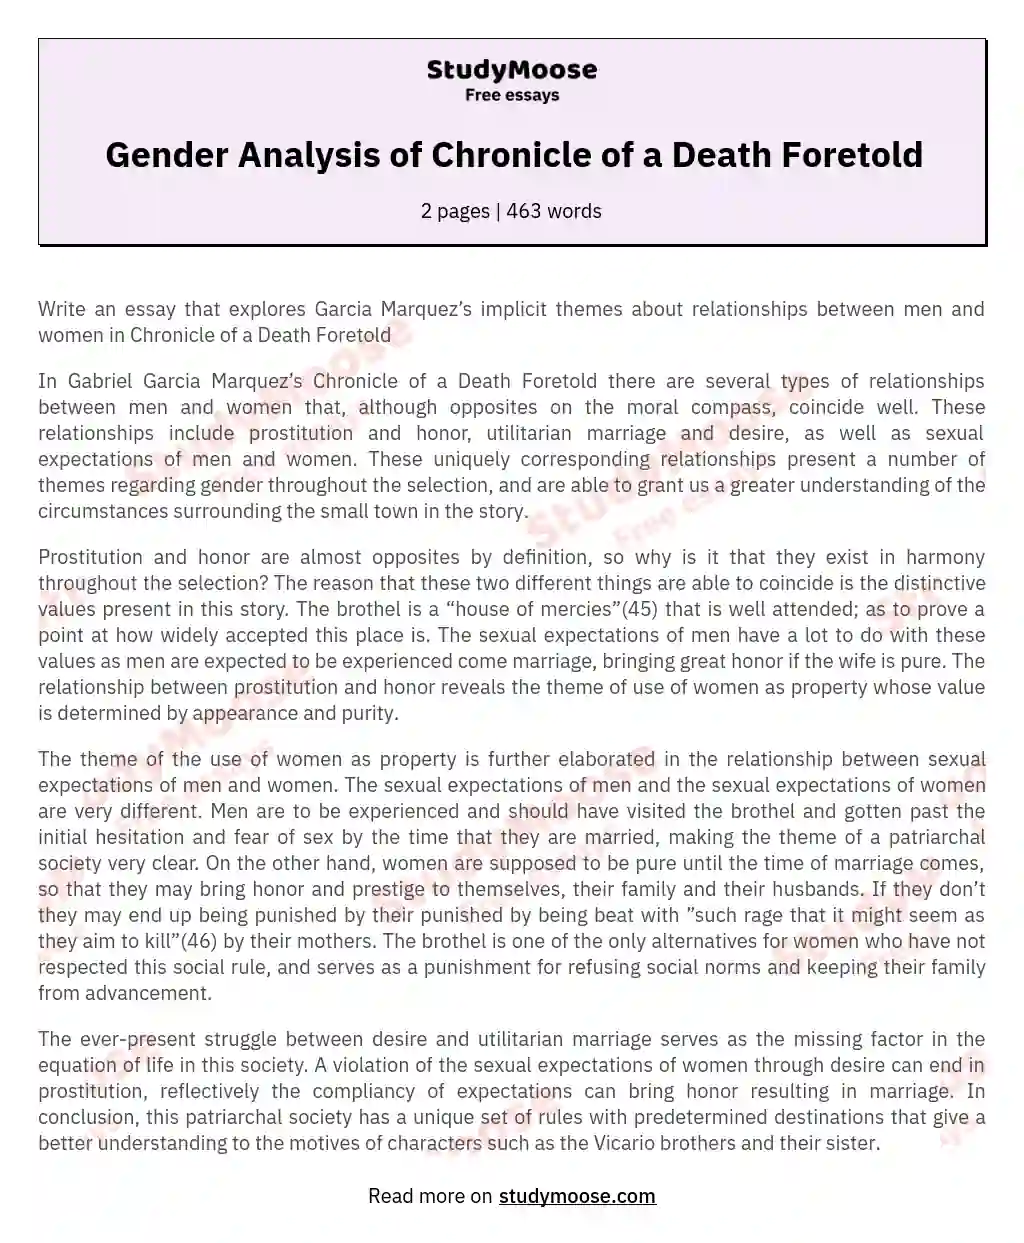 Gender Analysis of Chronicle of a Death Foretold